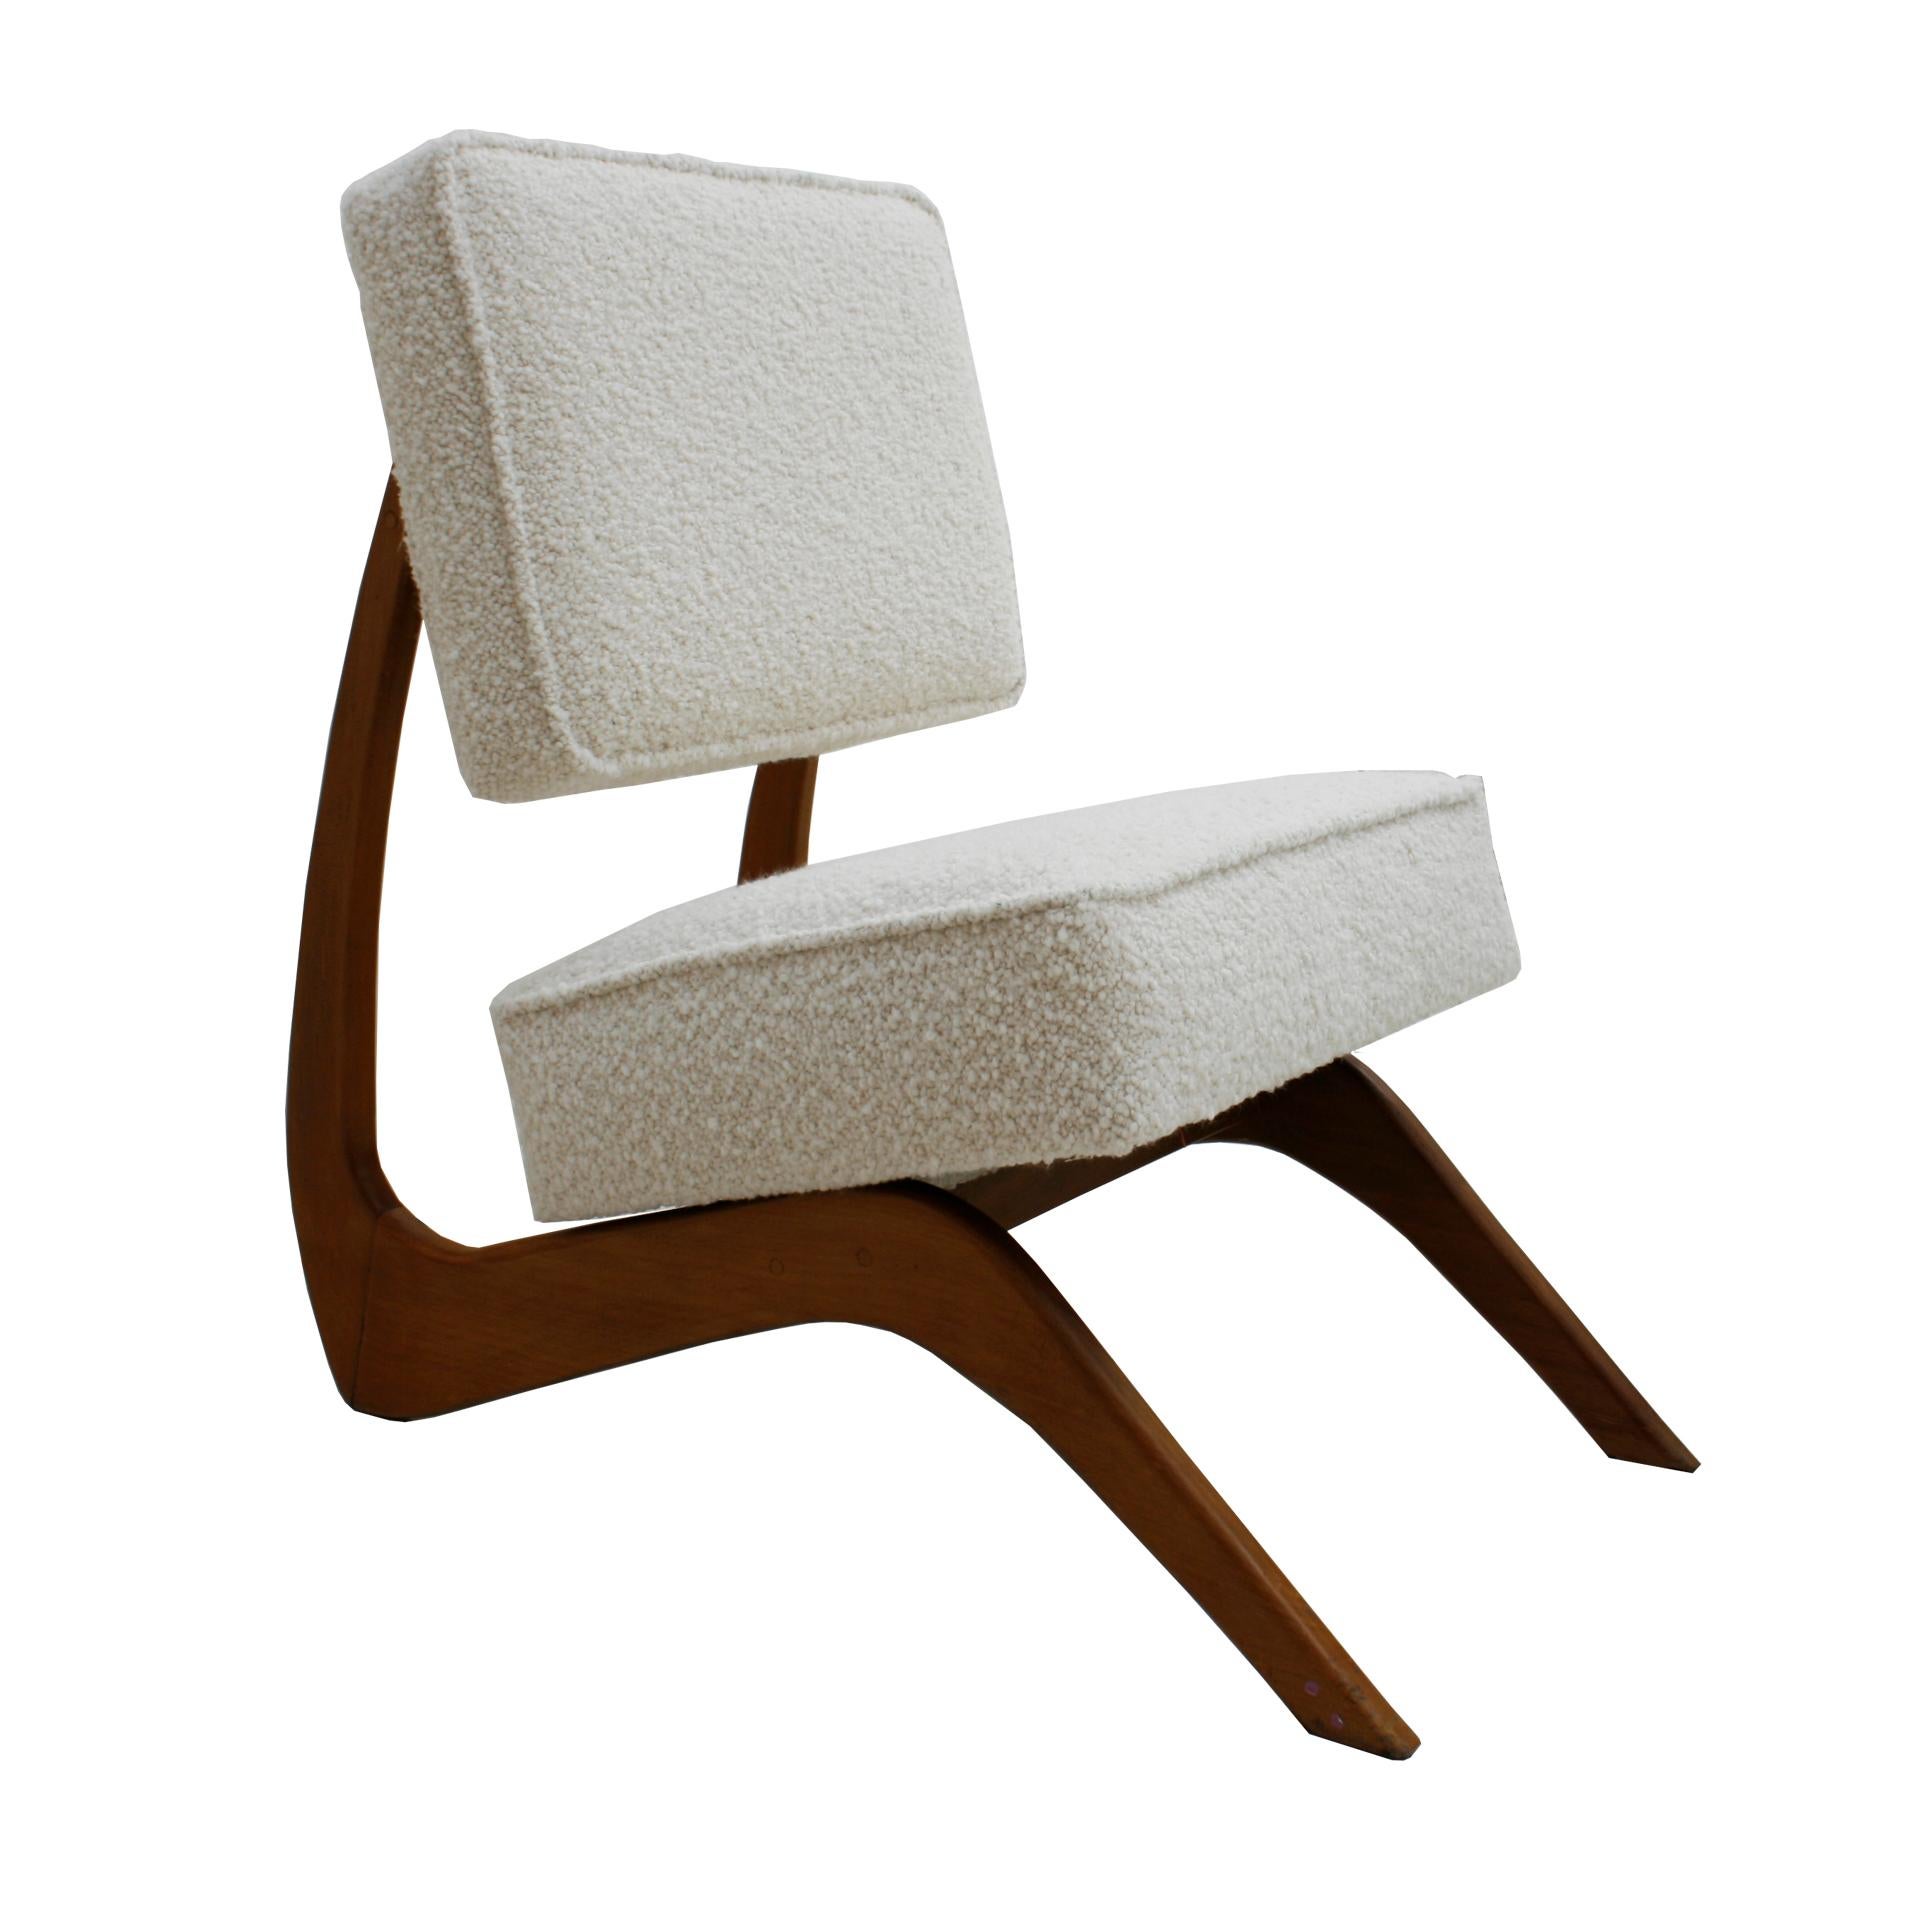 Pair of lounge chairs designed by America designer Adrian Pearsall (born 1925, Trumansburg, New York - died in Pennsylvania 2011) was a talented architect and furniture designer.
The structure of this lounge cocktail-chairs is made of walnut wood in